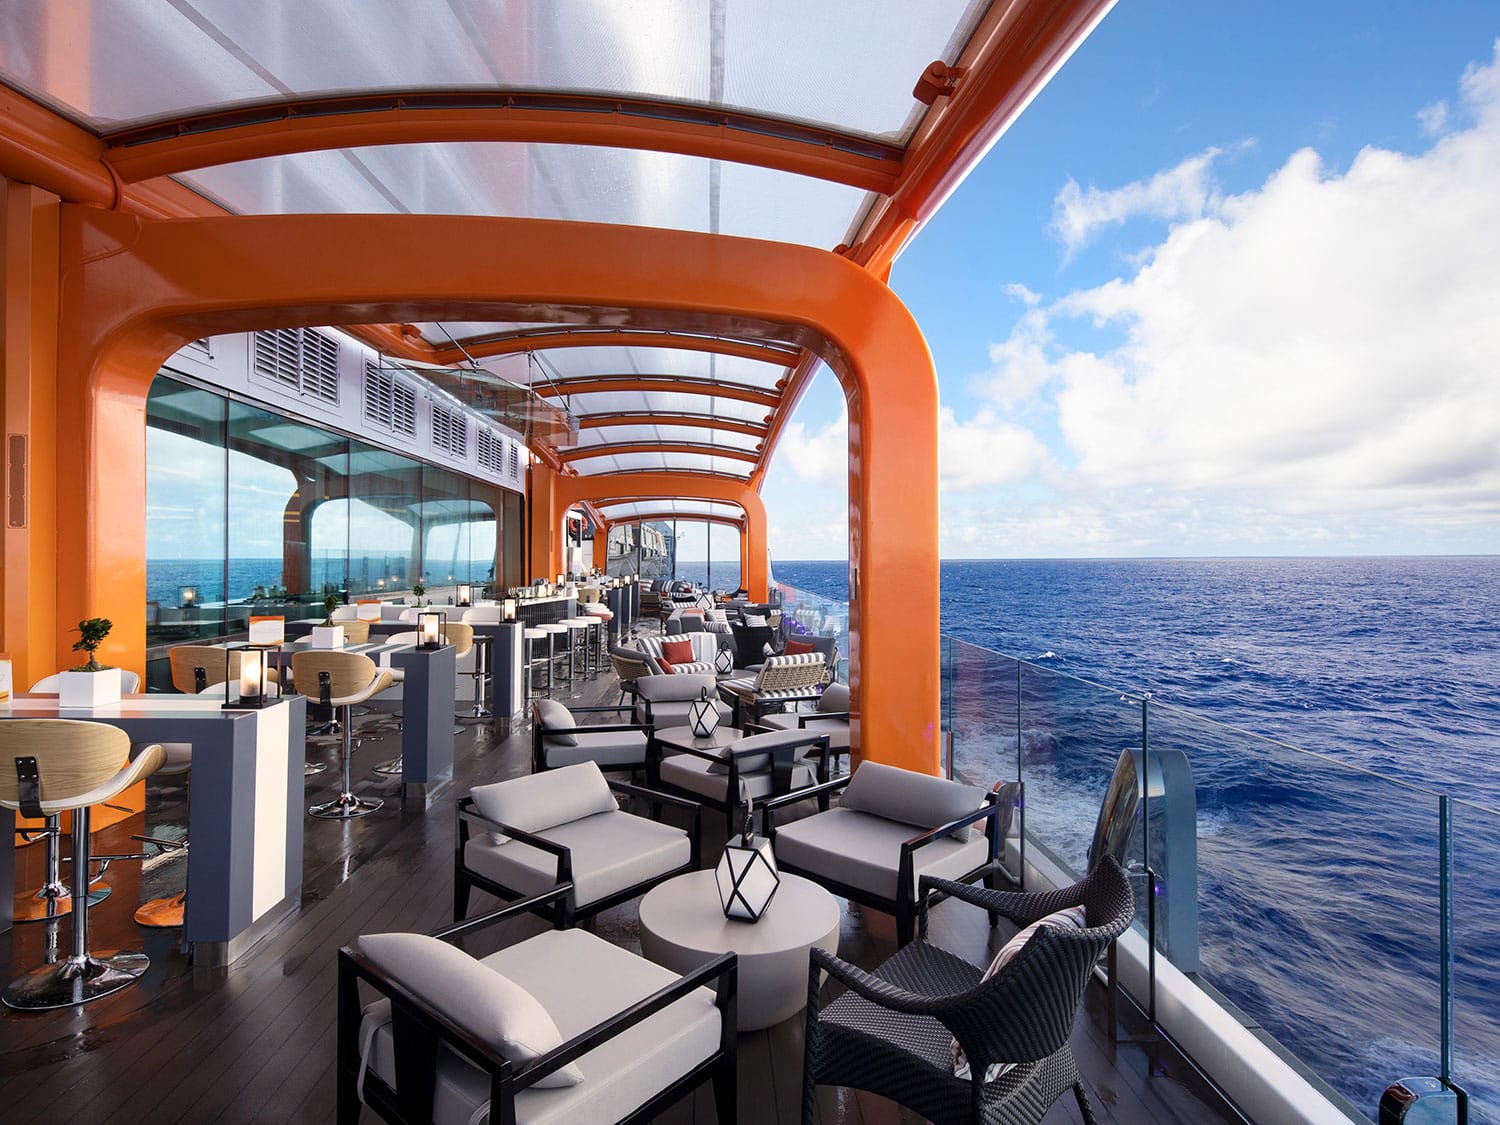 The view from the Magic Carpet special dining concept on the Celebrity Beyond cruise ship from Celebrity Cruises.